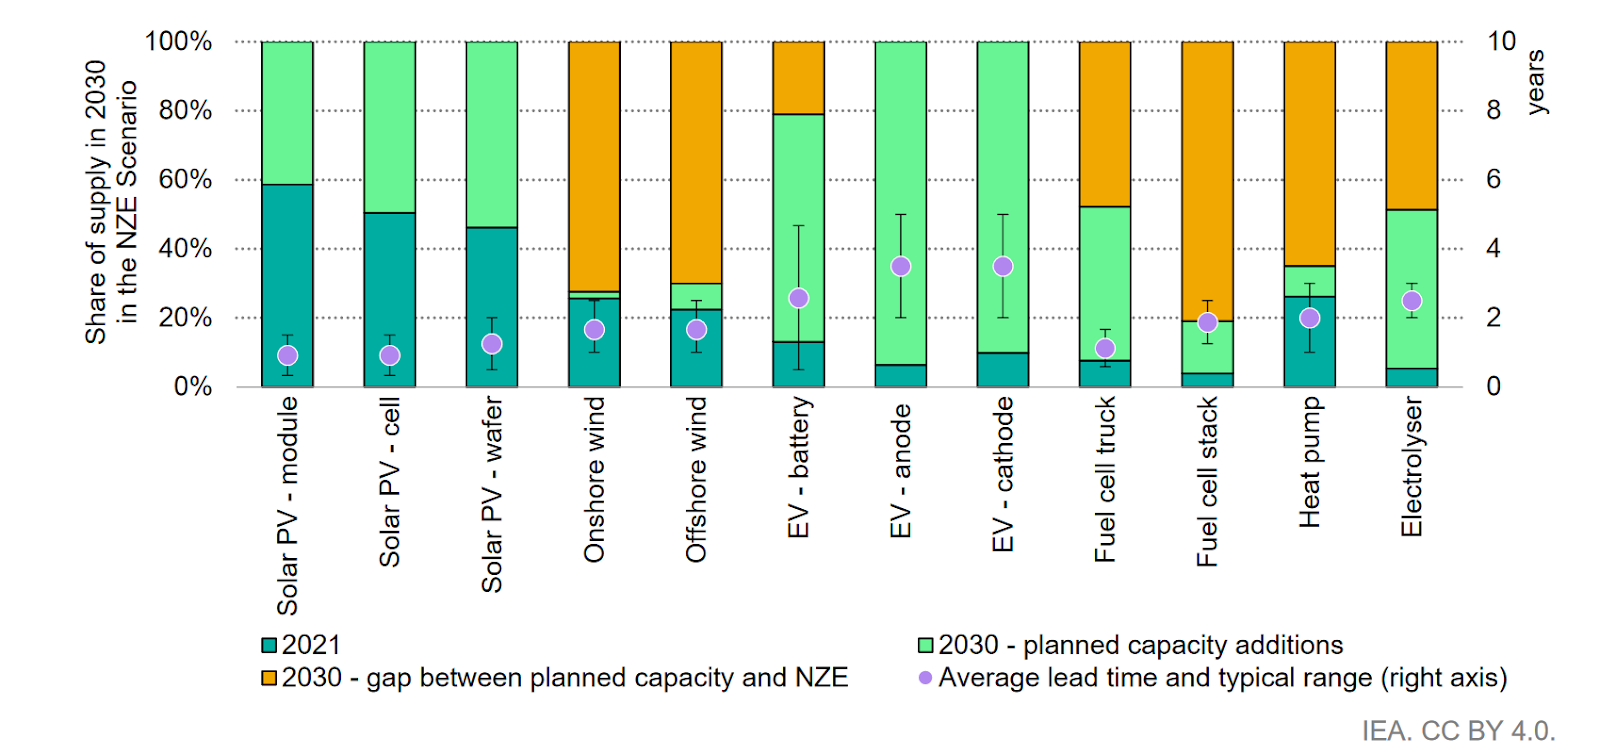 Current Global Manufacturing Capacity, Announced Capacity Additions, Capacity Shortfall In 2030, and Lead times for
Selected Clean Energy Technologies, Source: IEA